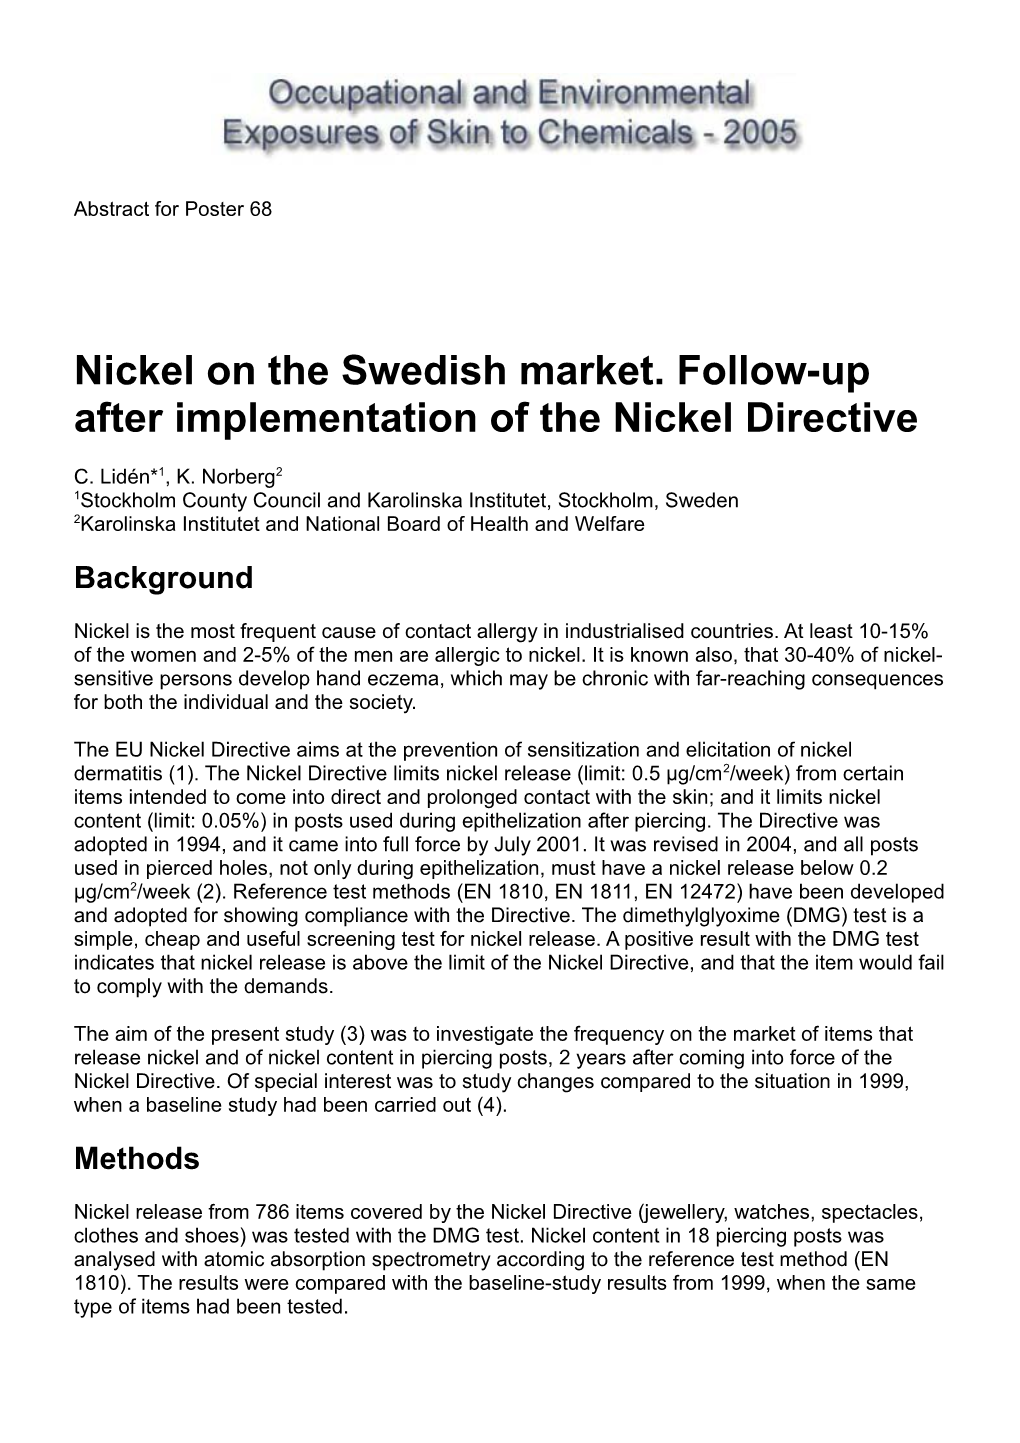 Nickel on the Swedish Market. Follow-Up After Implementation of the Nickel Directive